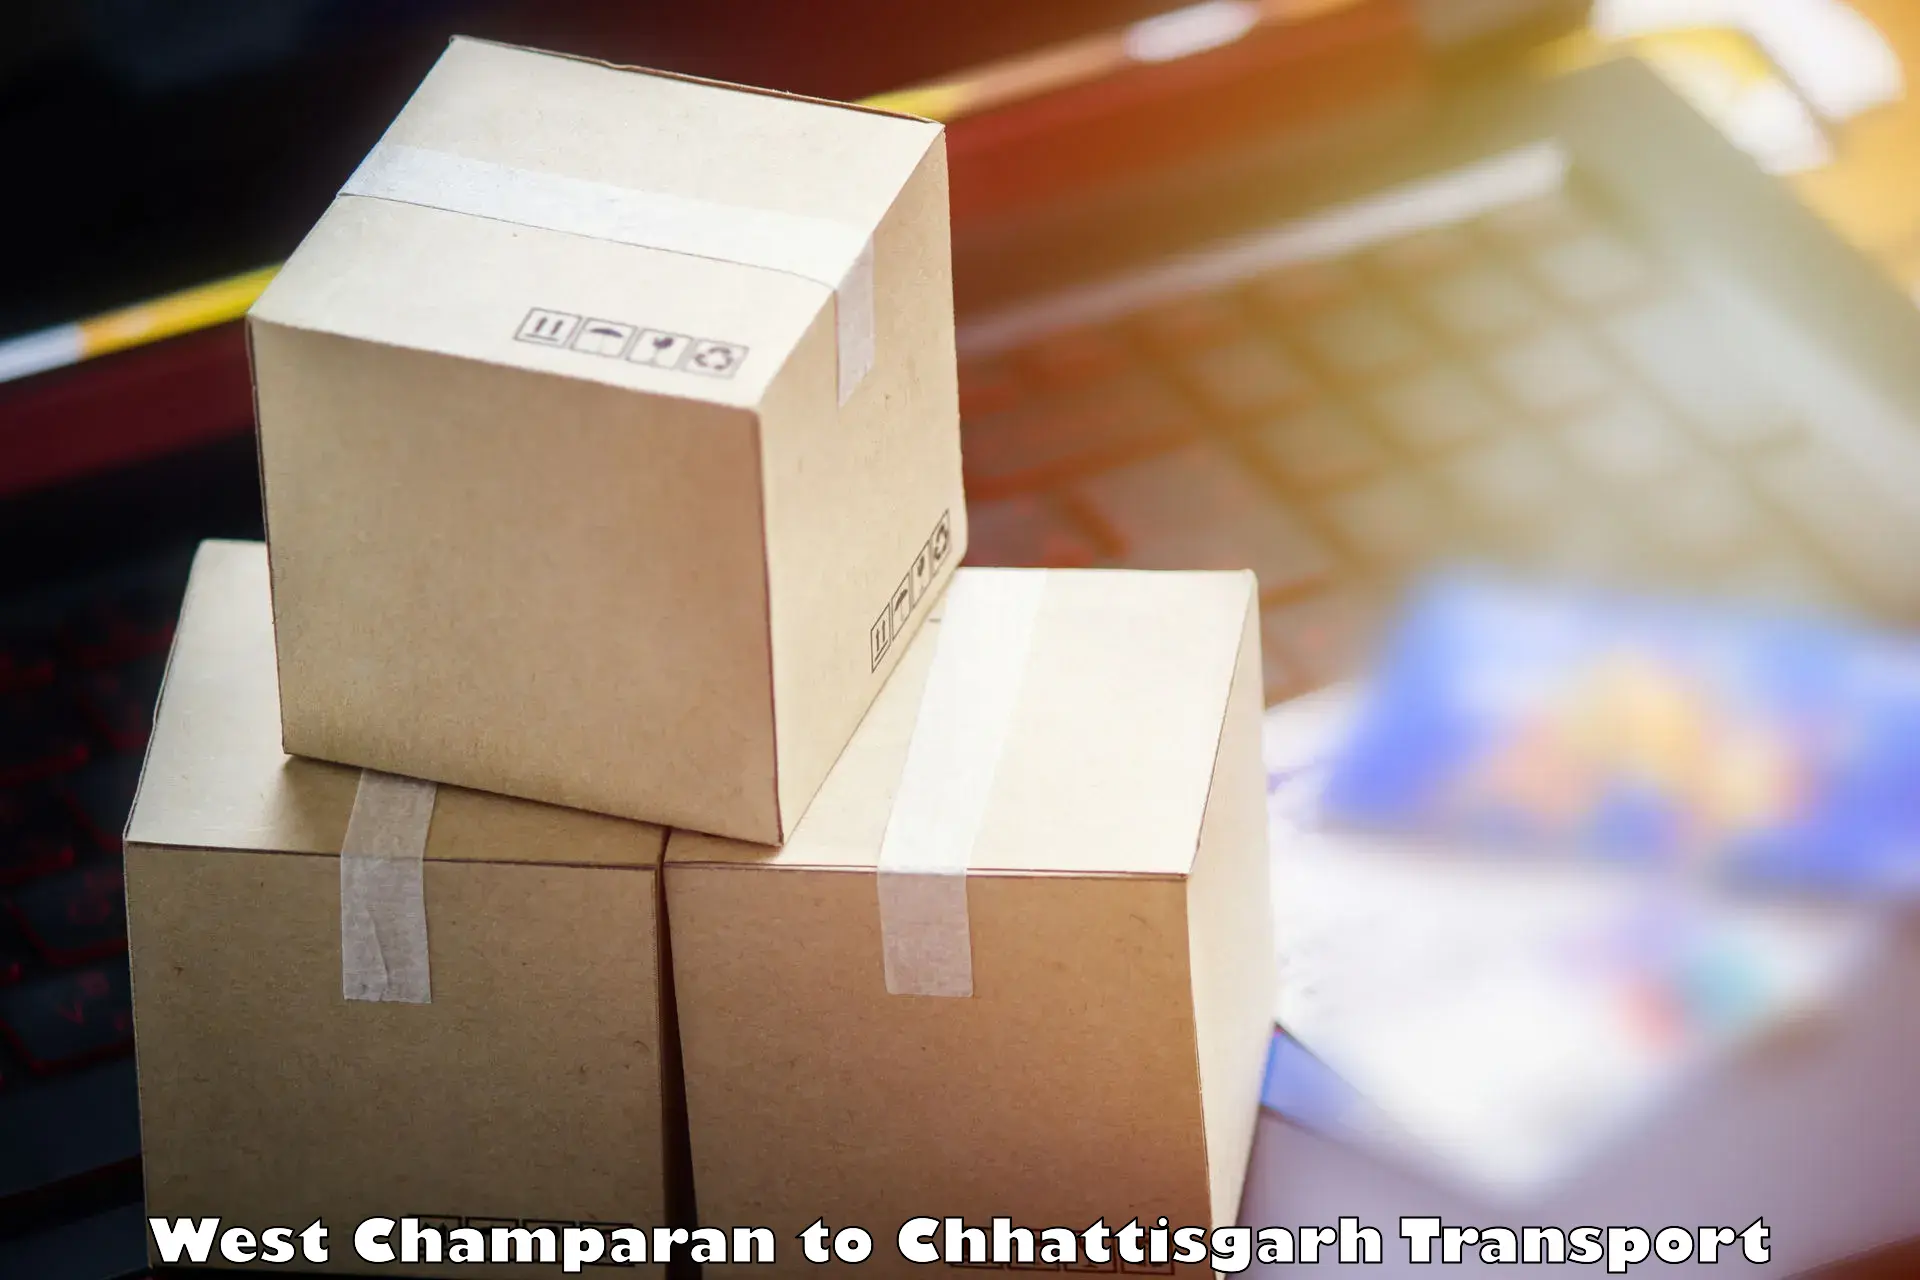 Shipping partner West Champaran to Raigarh